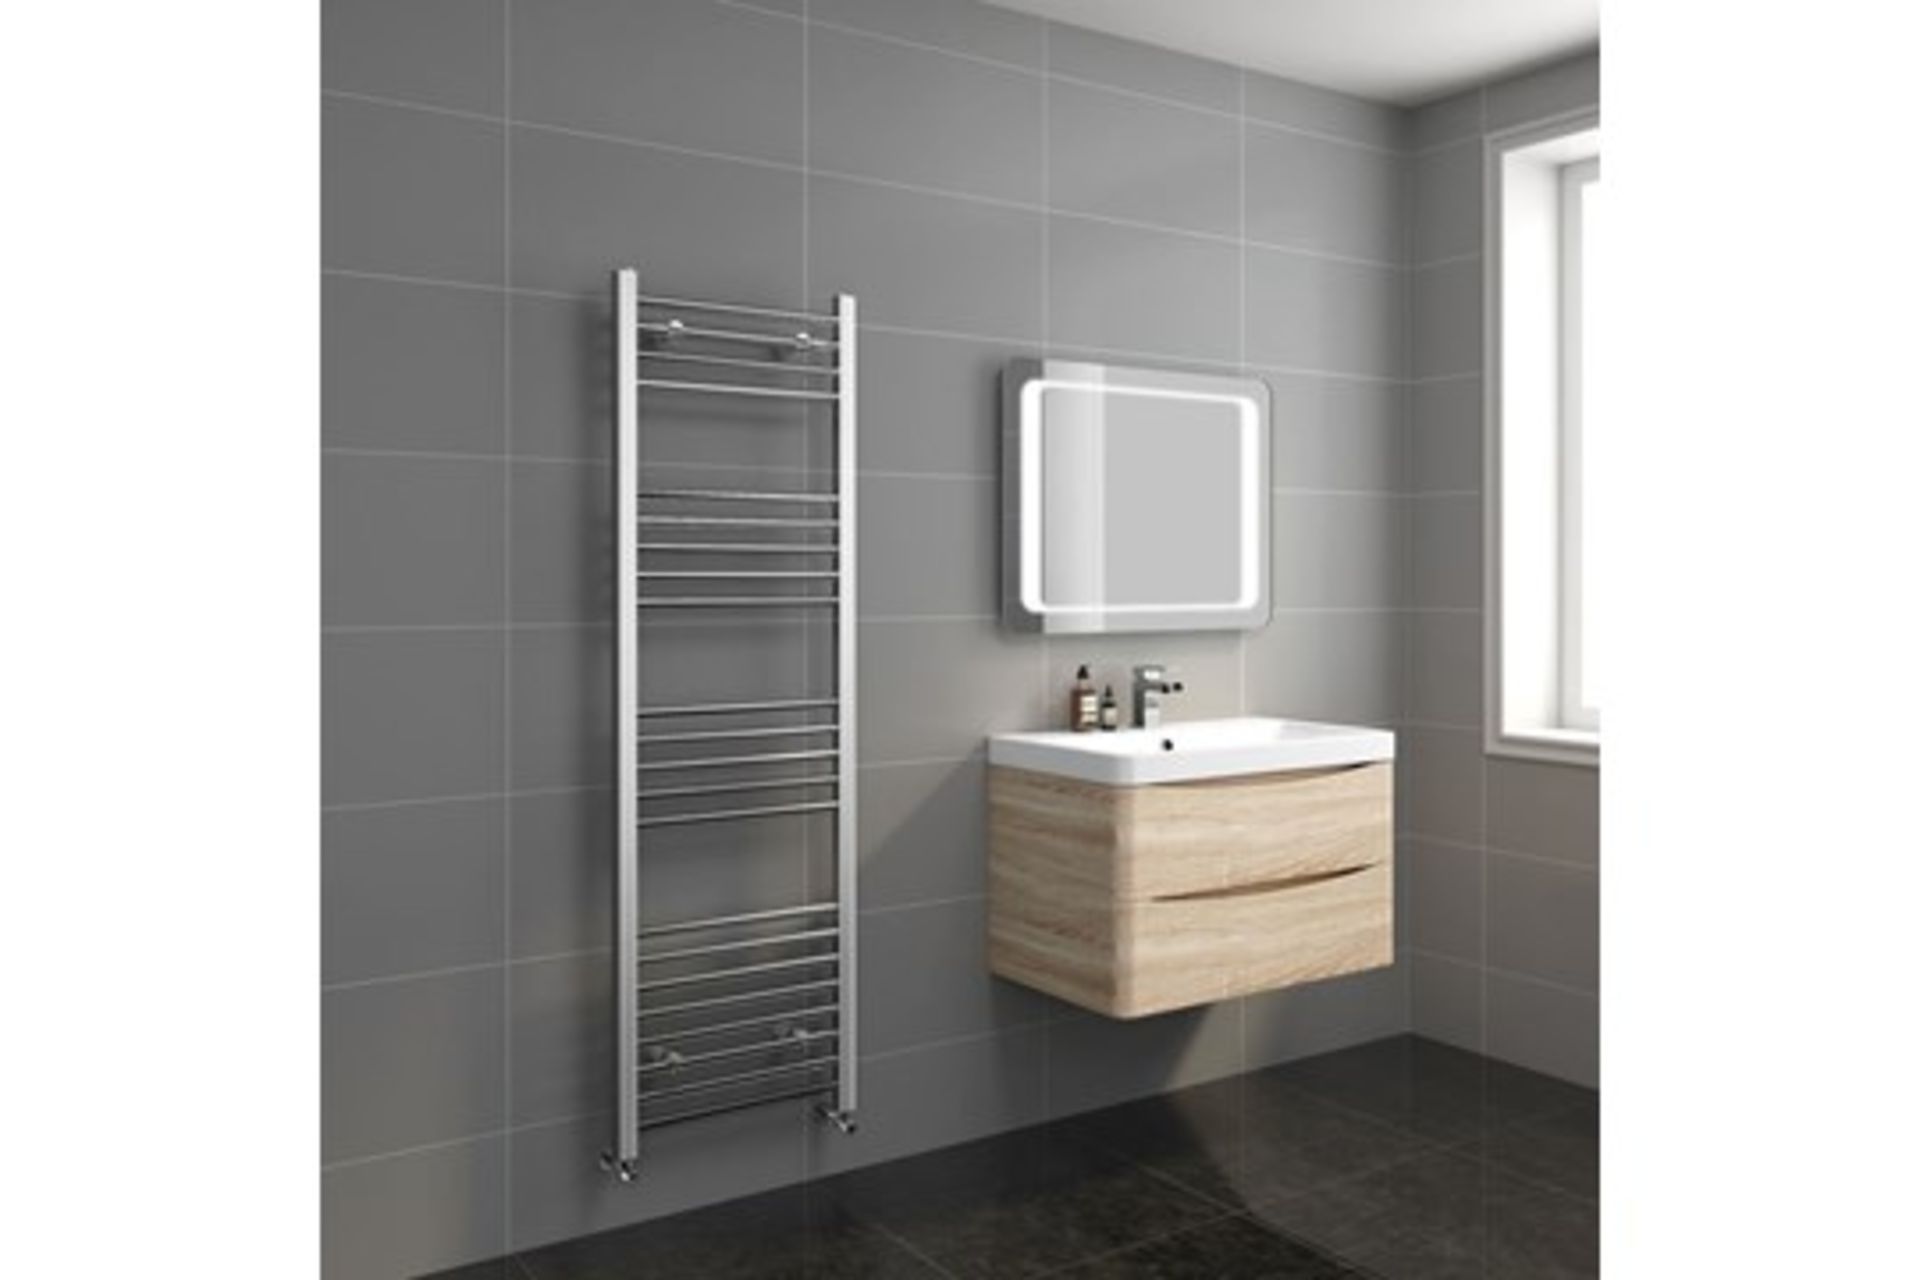 5 BRAND NEW BOXED 1600x500mm - 20mm Tubes - Chrome Heated Straight Rail Ladder Towel Radiator. - Image 2 of 3